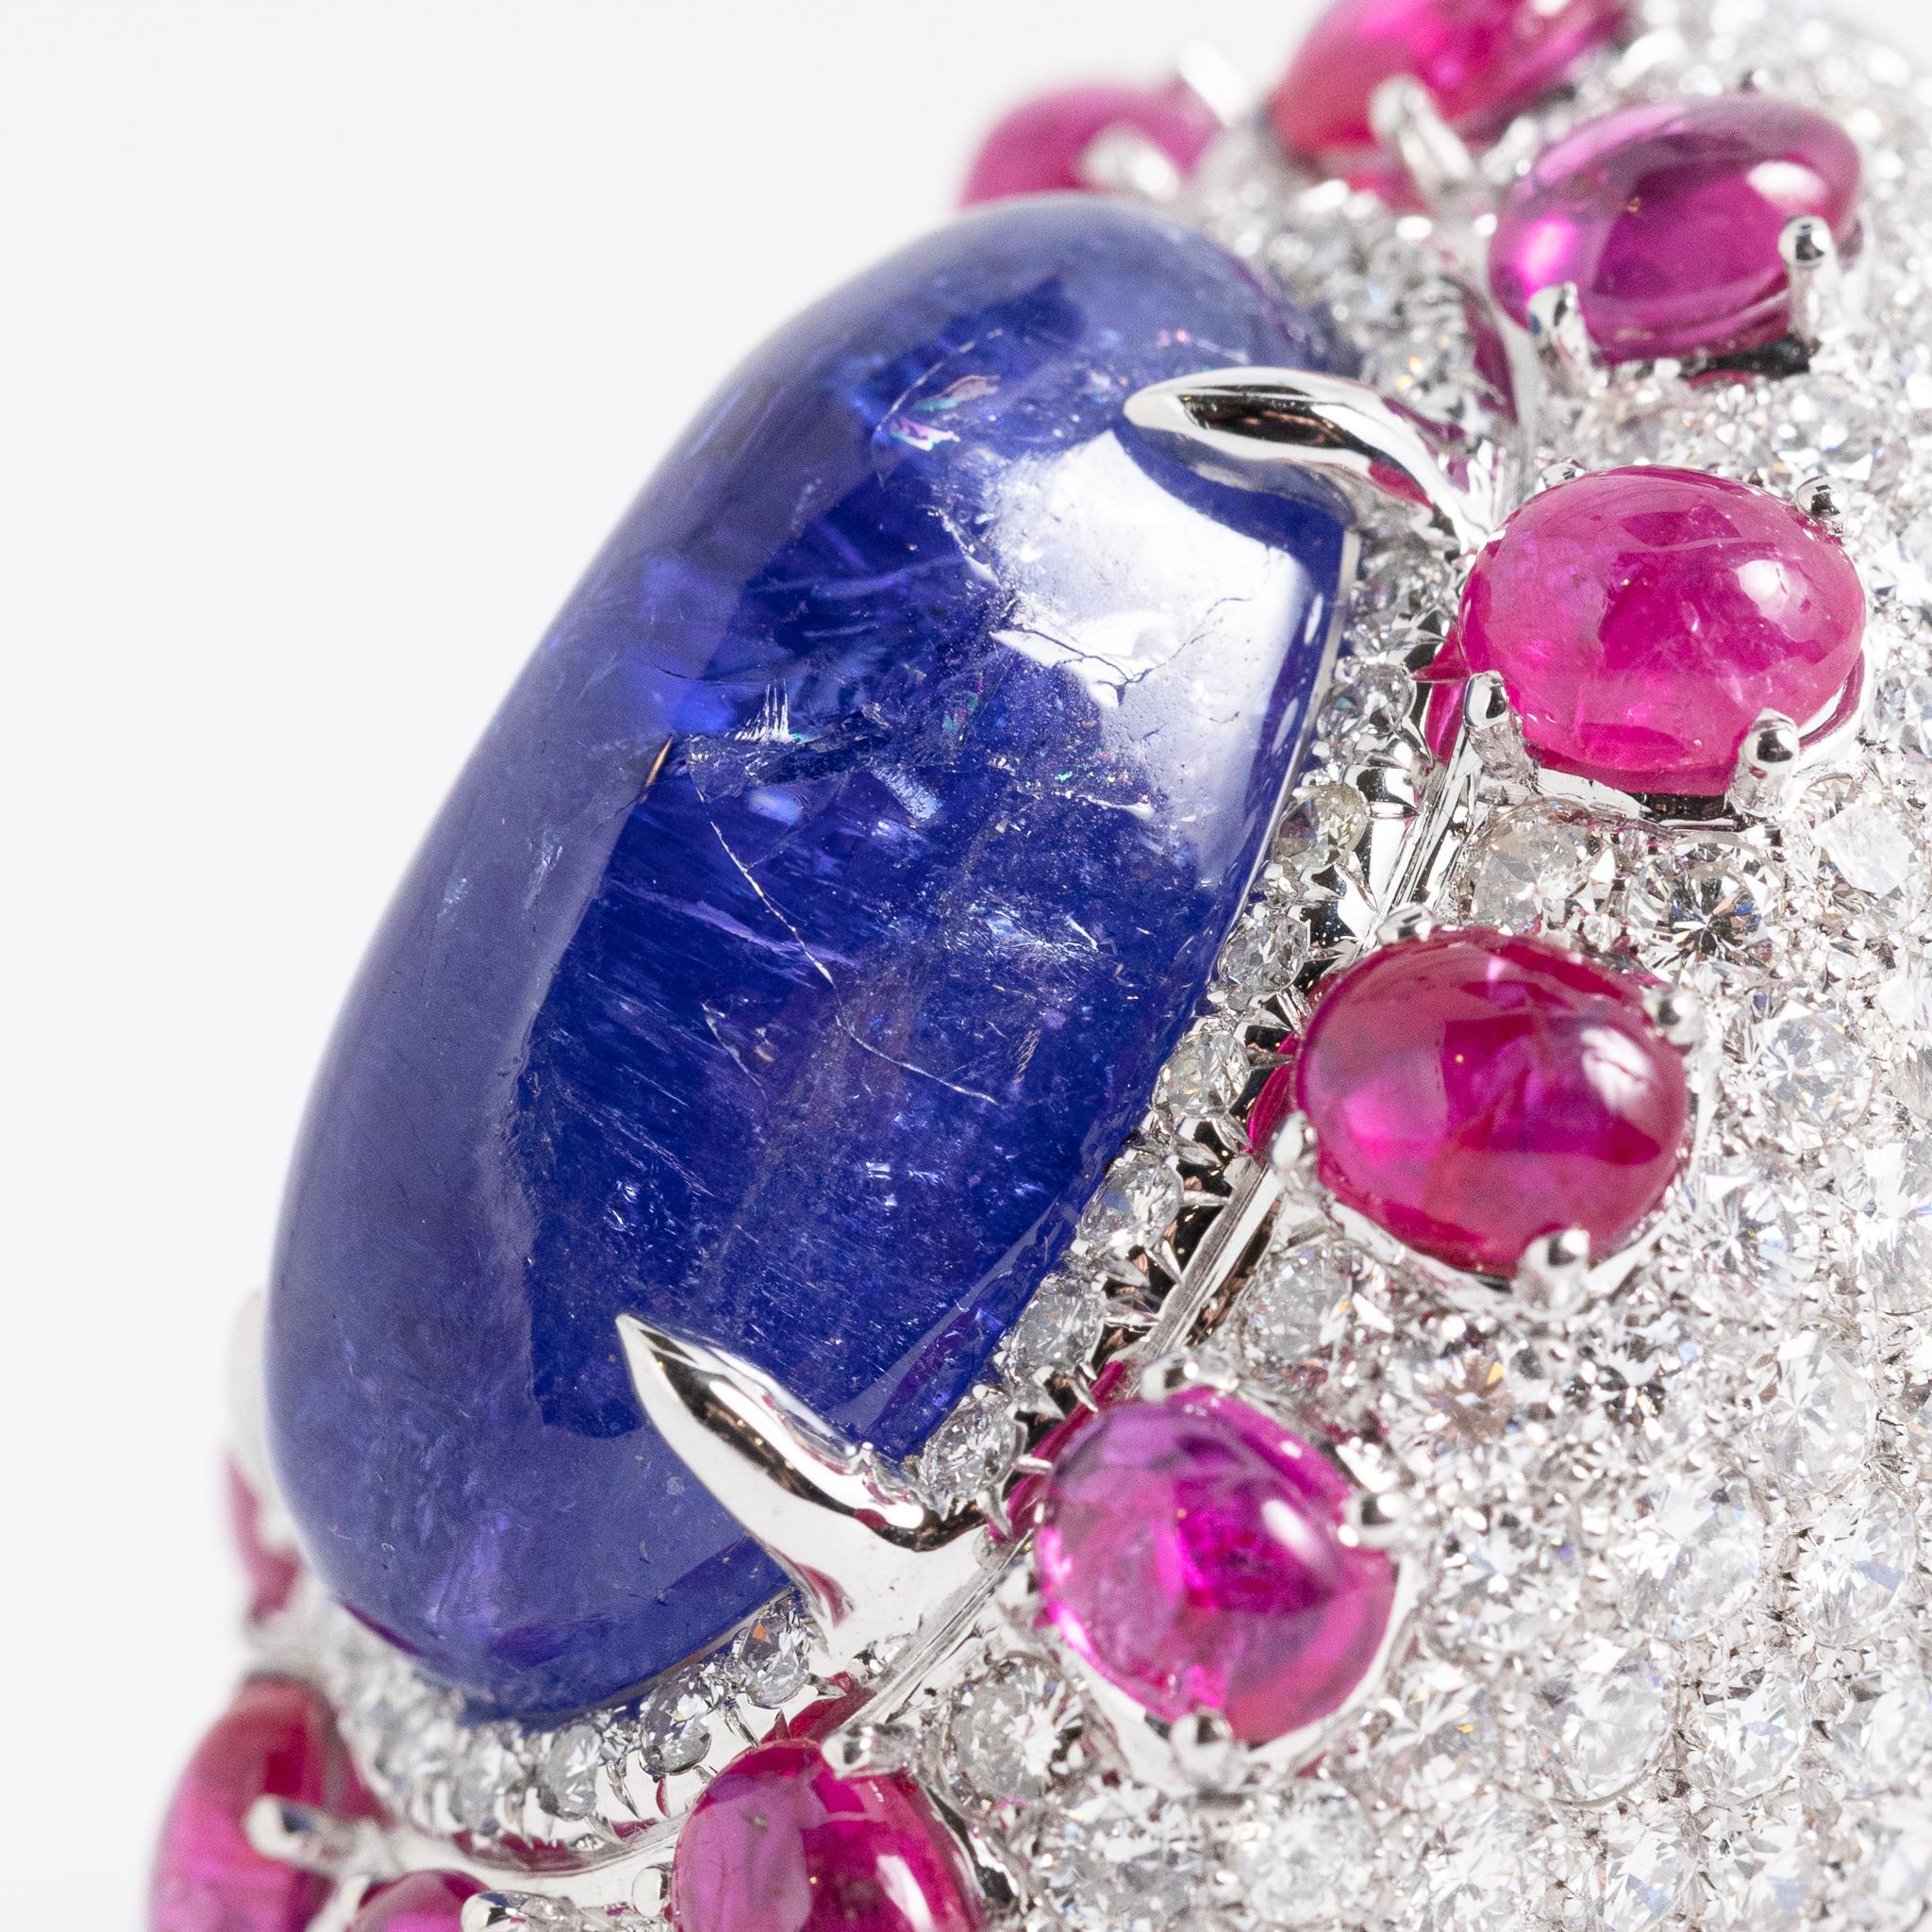 Ring made of 18 kt. white gold with diamonds, rubies and tanzanite signed Fraleoni.
This cocktail ring is part of the Queen Collection and is entirely handmade in Italy.
One of a kind. 
There is a reducer inside the ring to adjust the